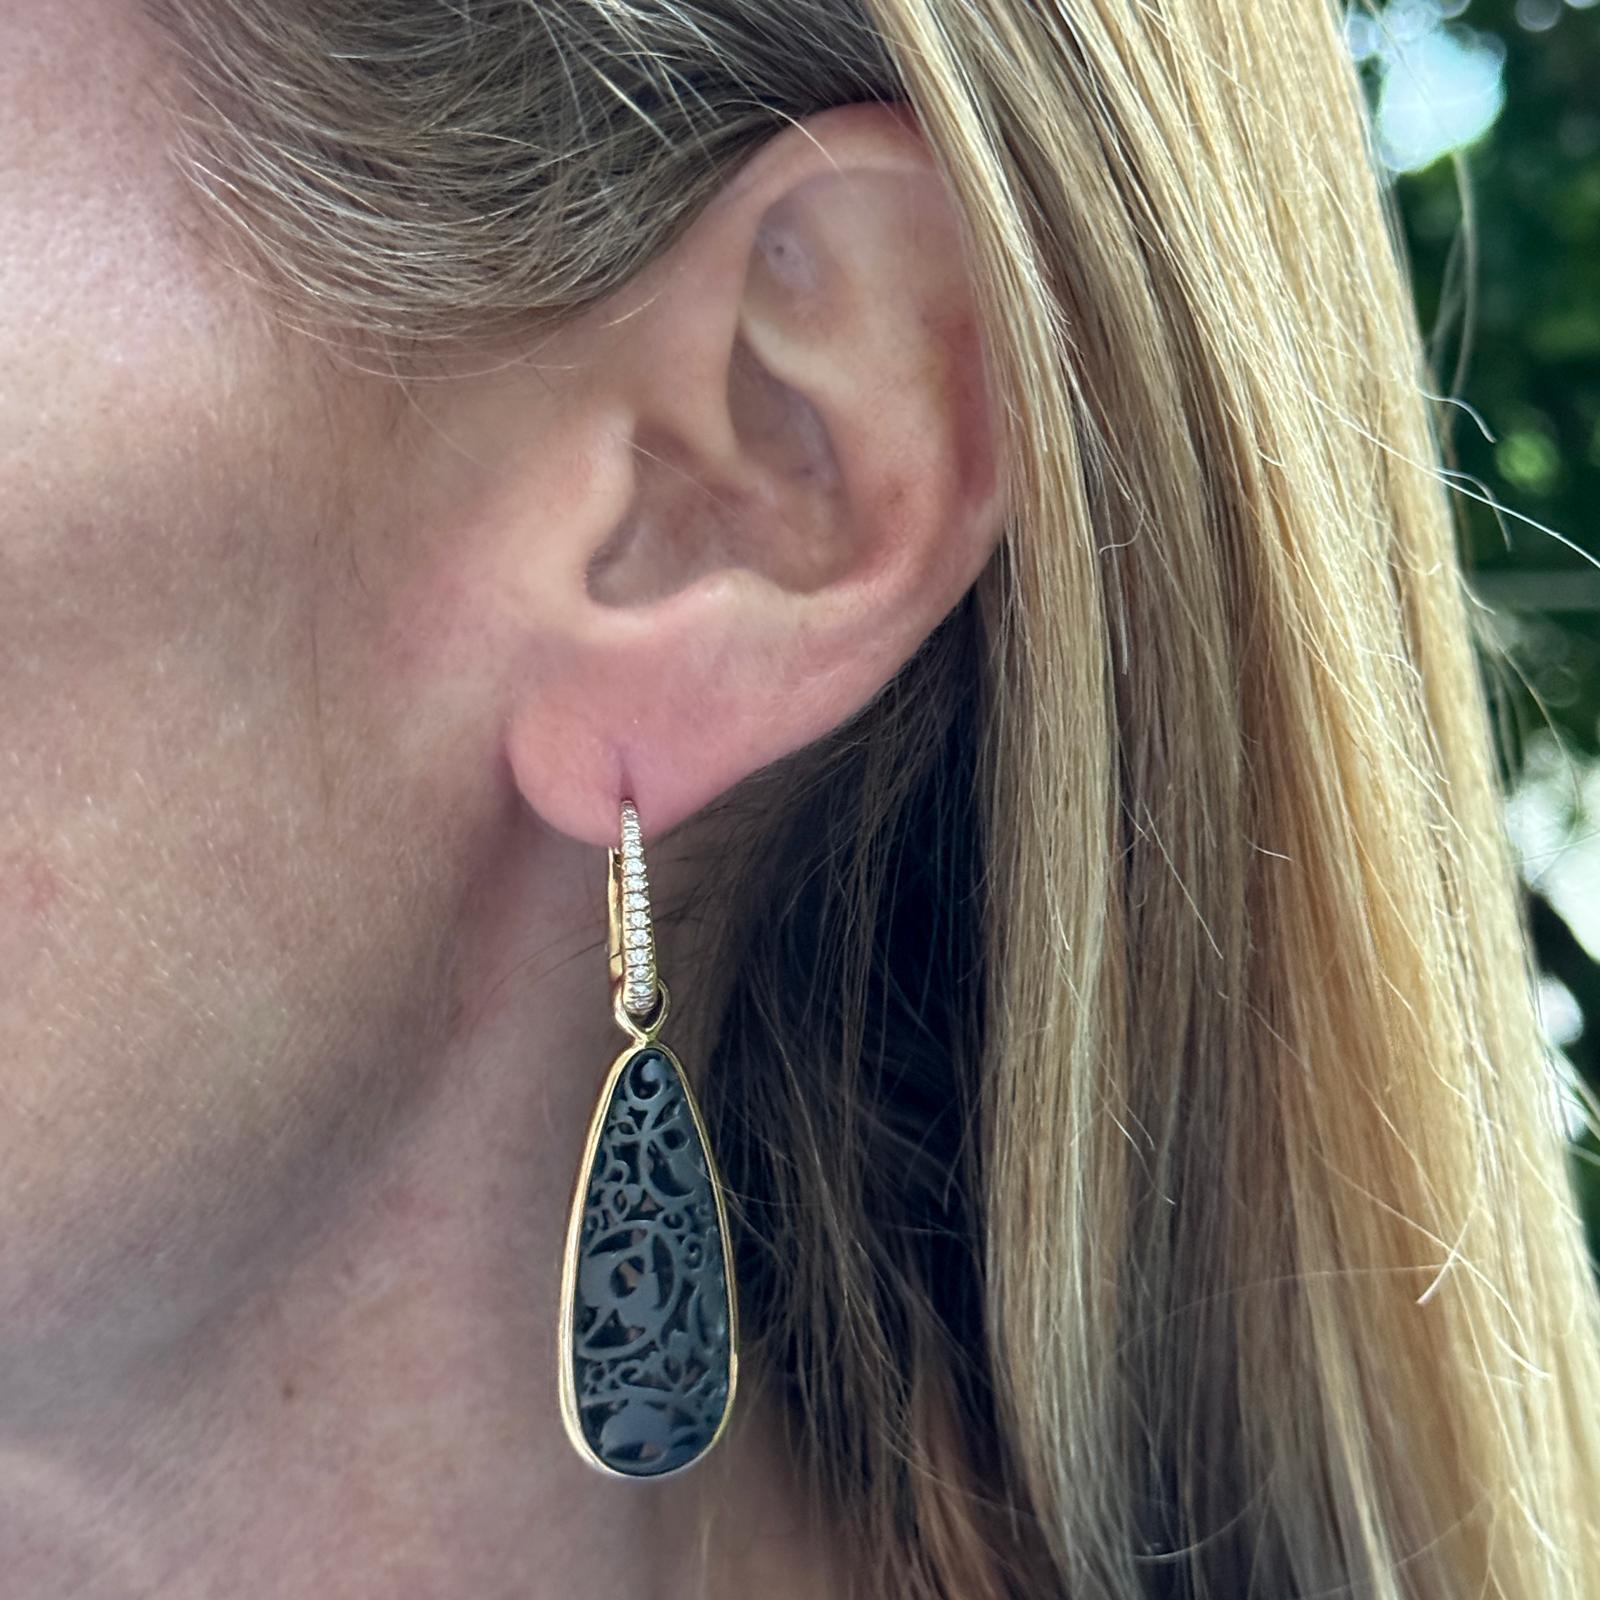 Pomellato modern diamond drop earrings crafted in 18 karat yellow gold and black titanium. The teardrop shape earrings feature 26 round brilliant cut diamonds weighing approximately .25 carat total weight. The earrings measure 2.25 inches in length.